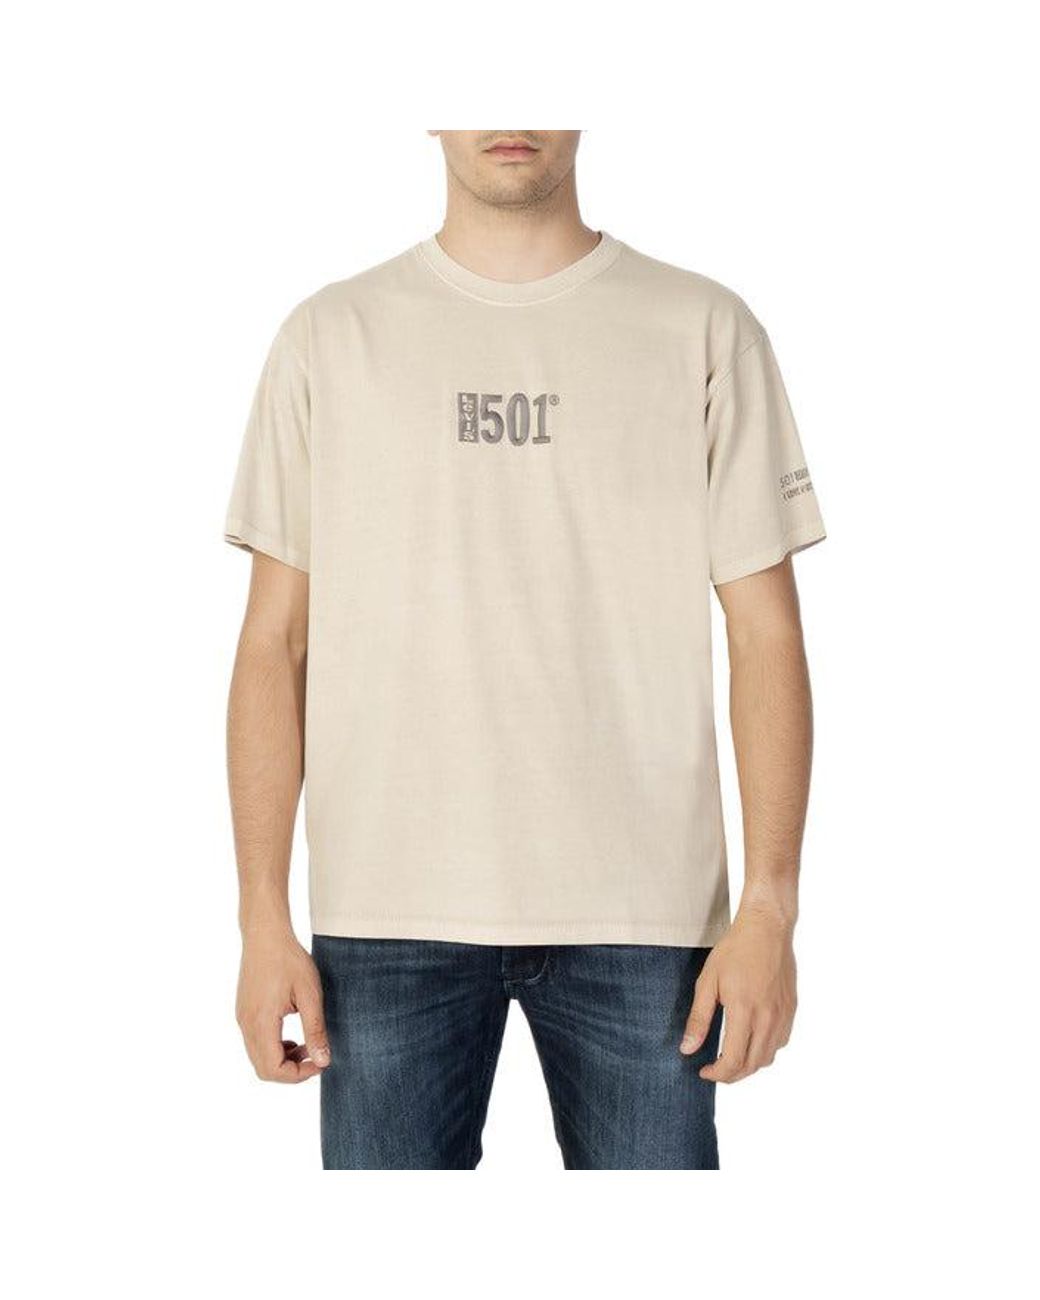 Levi's T-shirt in Natural for Men | Lyst